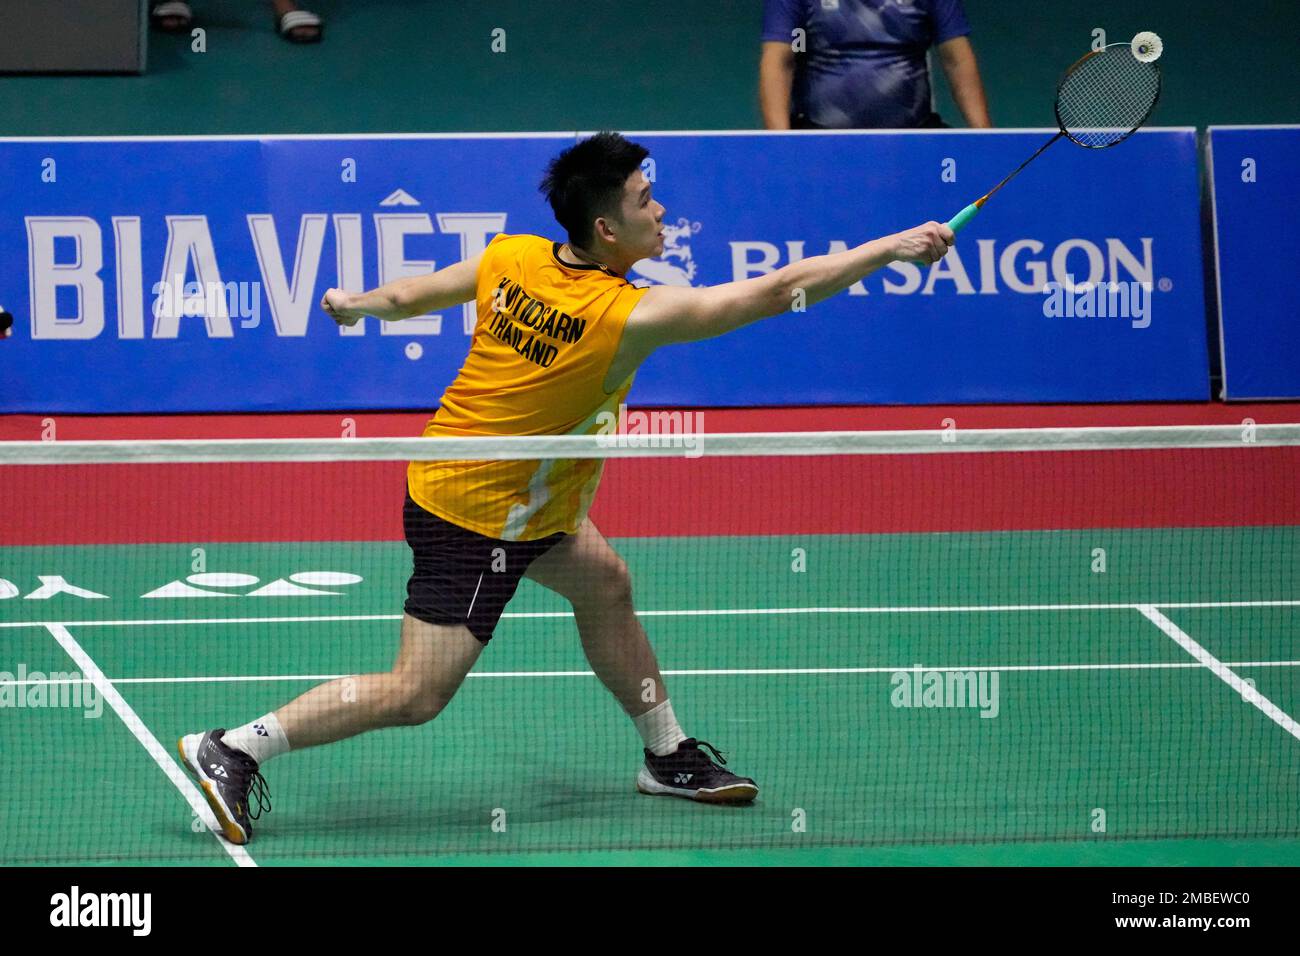 Thailands Kunlavut Vitidsarn competes against Malaysias Kok Jing Hong during their mens team badminton final match at the 31st Southeast Asian Games (SEA Games), Wednesday, May 18, 2022 in Bac Giang, Vietnam